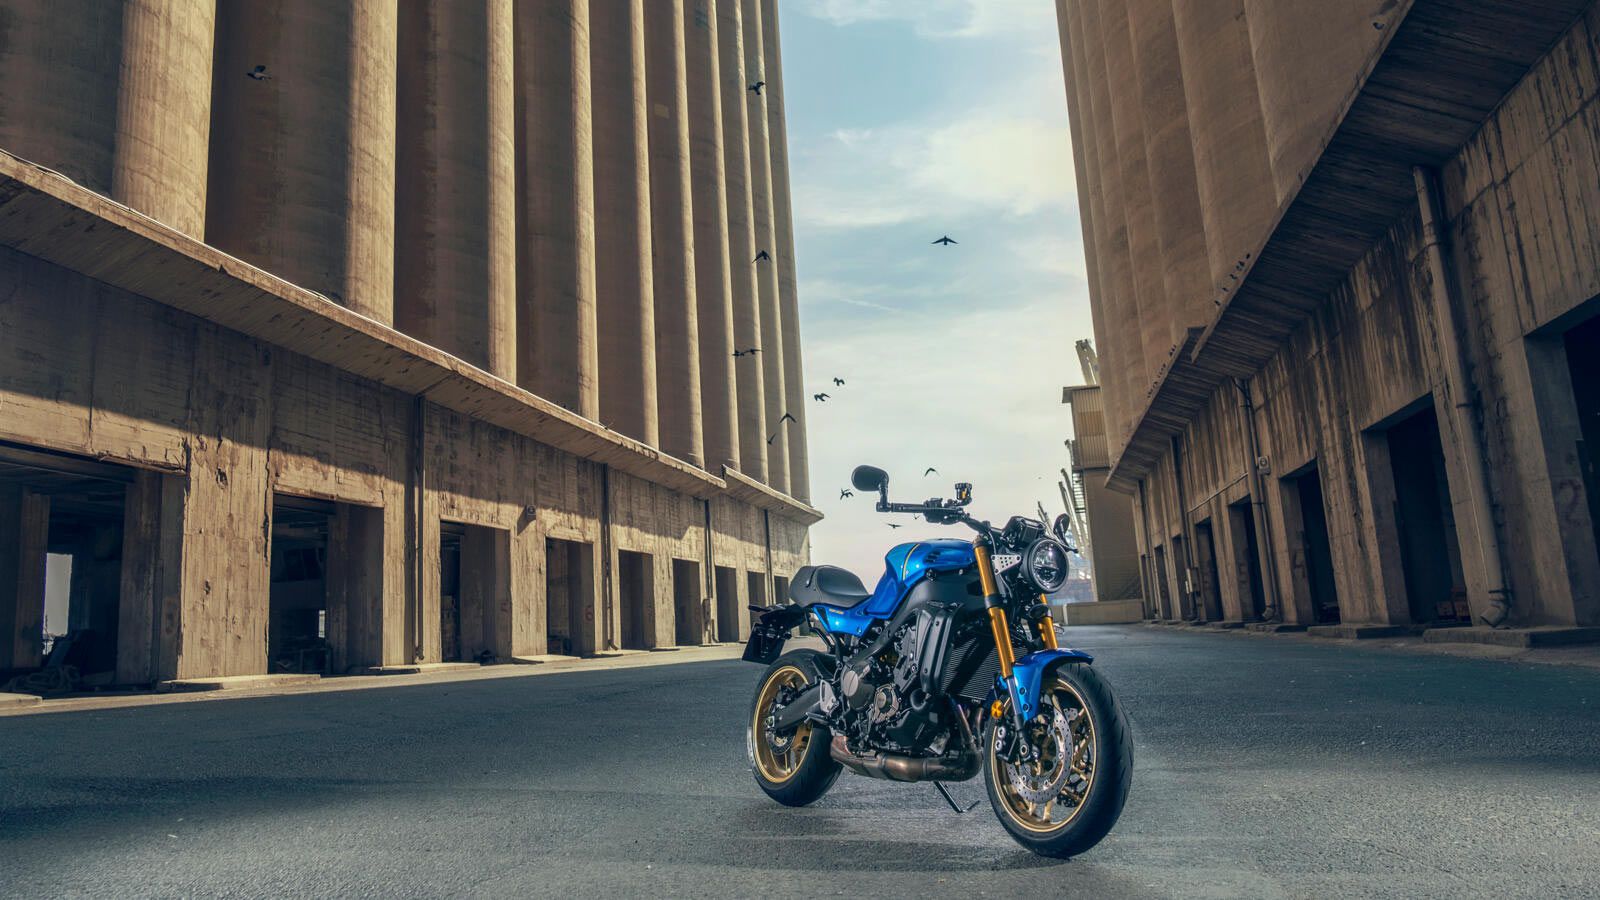 The 2022 Yamaha XSR900 will be available in European markets starting February 2022.